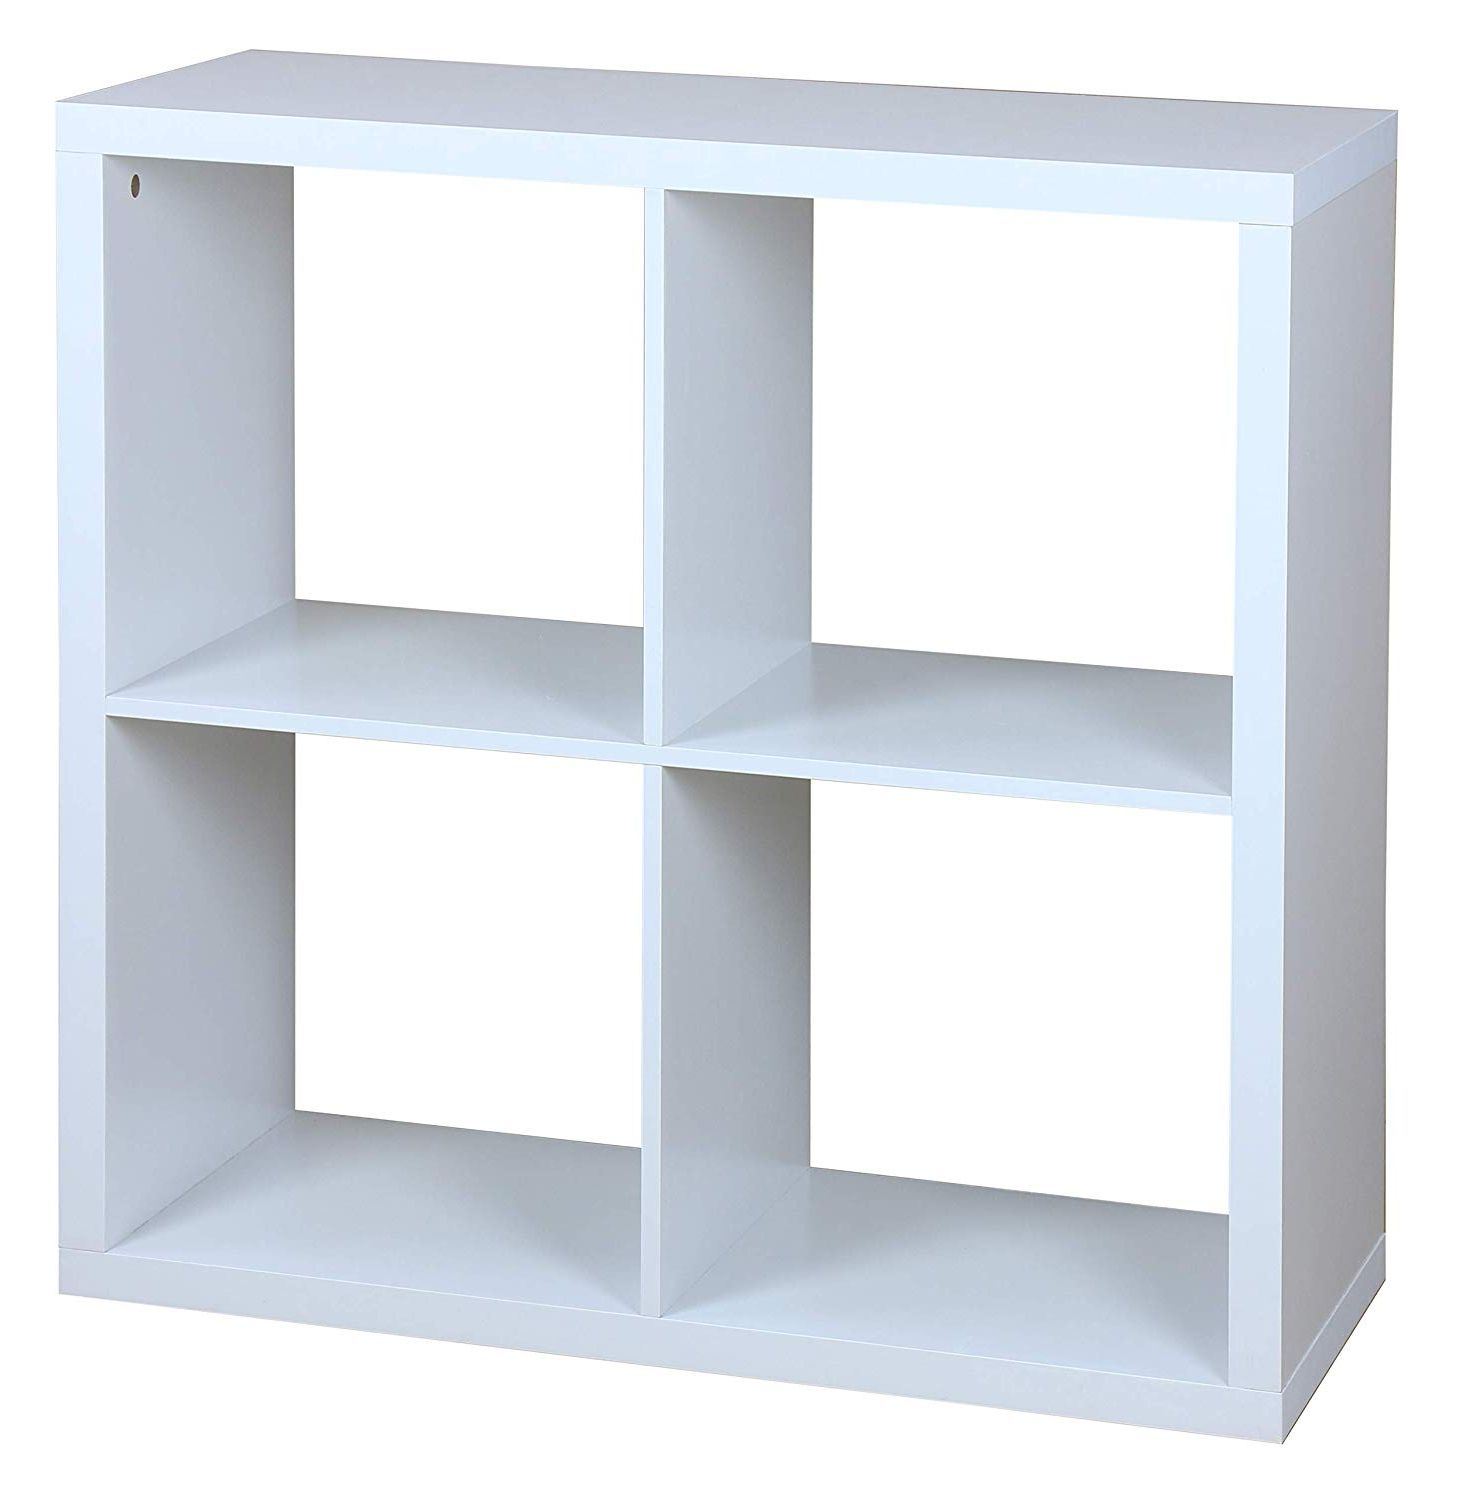 Broadview Cube Unit Bookcases Pertaining To Current Amazon: Home Basics Open Cube Organizing Wood Storage (View 13 of 20)